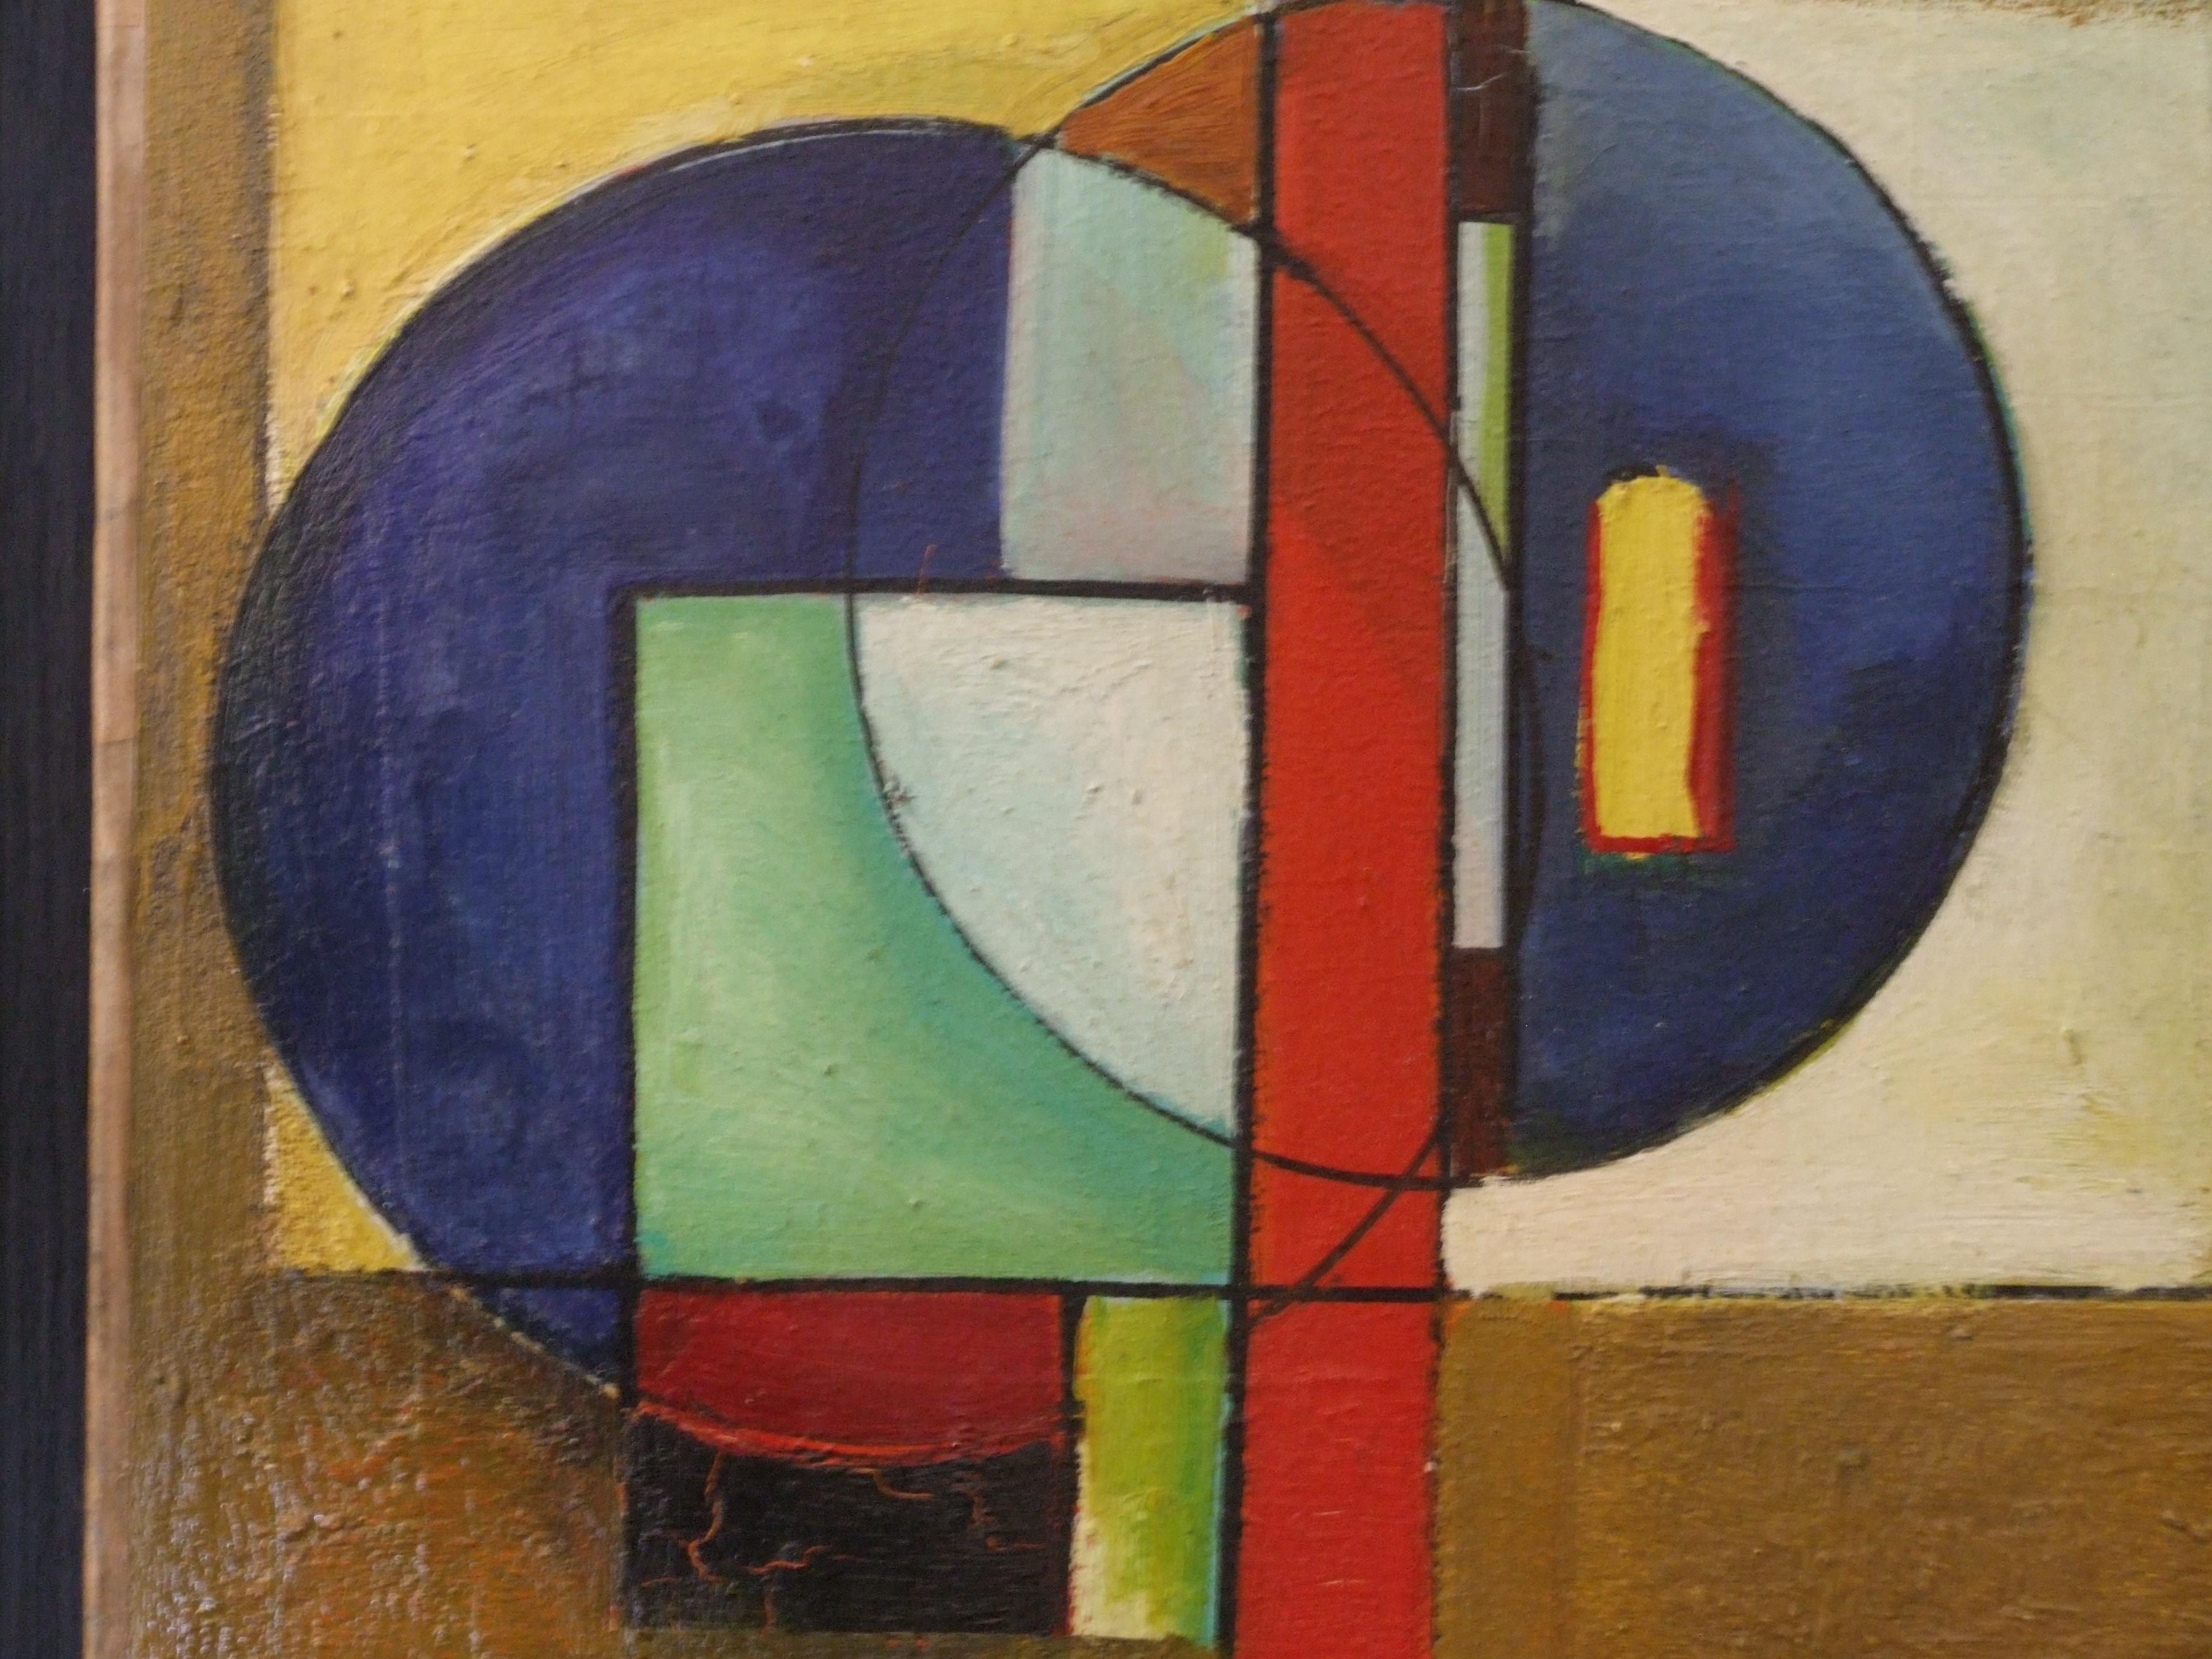 ABSTRACT GEOMETRIC - Abstract Geometric Painting by Paul Mansouroff